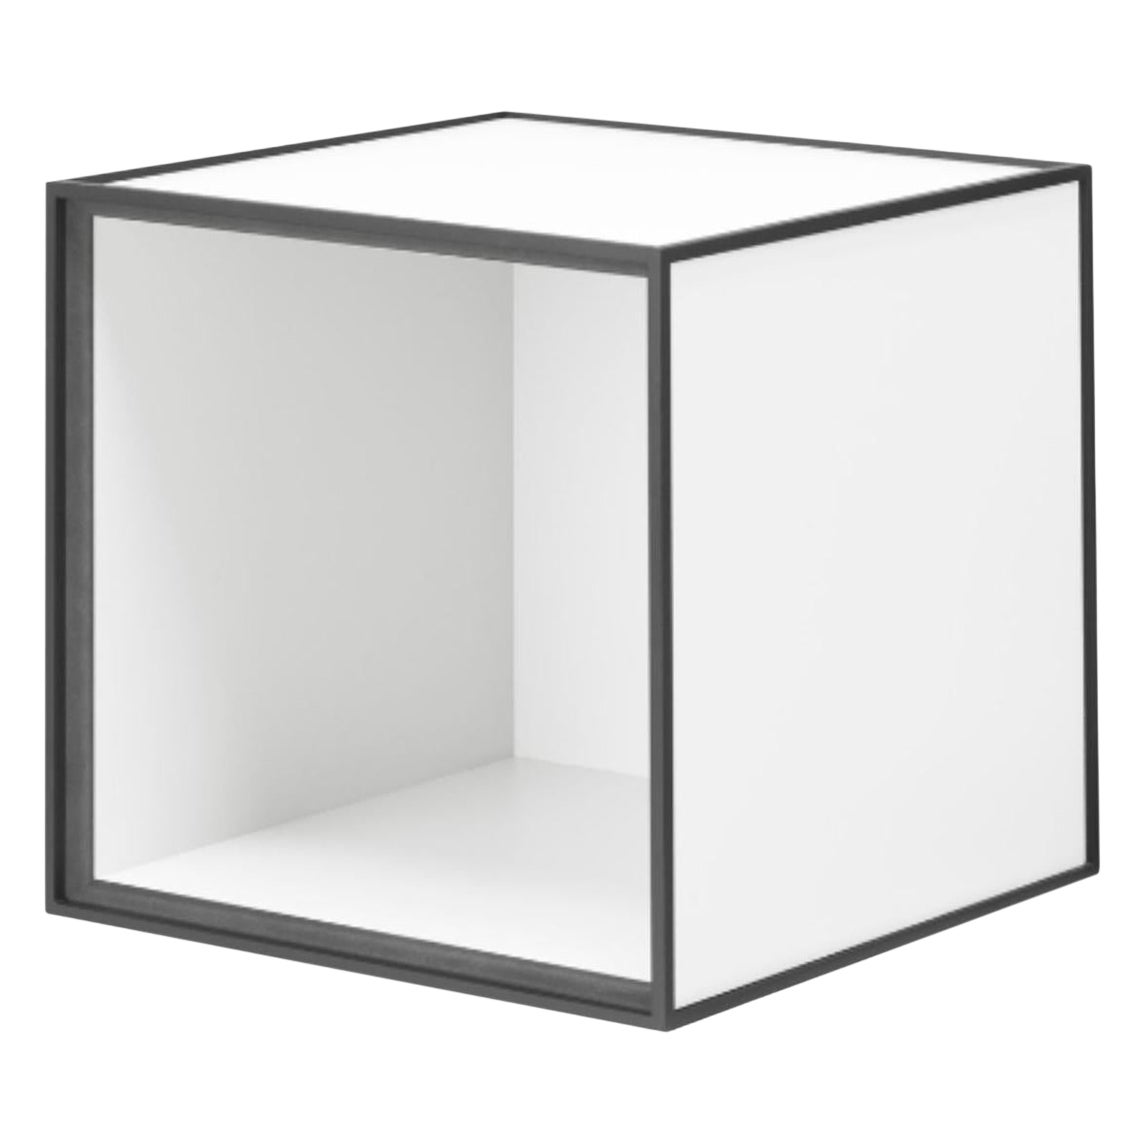 35 White Frame Box by Lassen For Sale